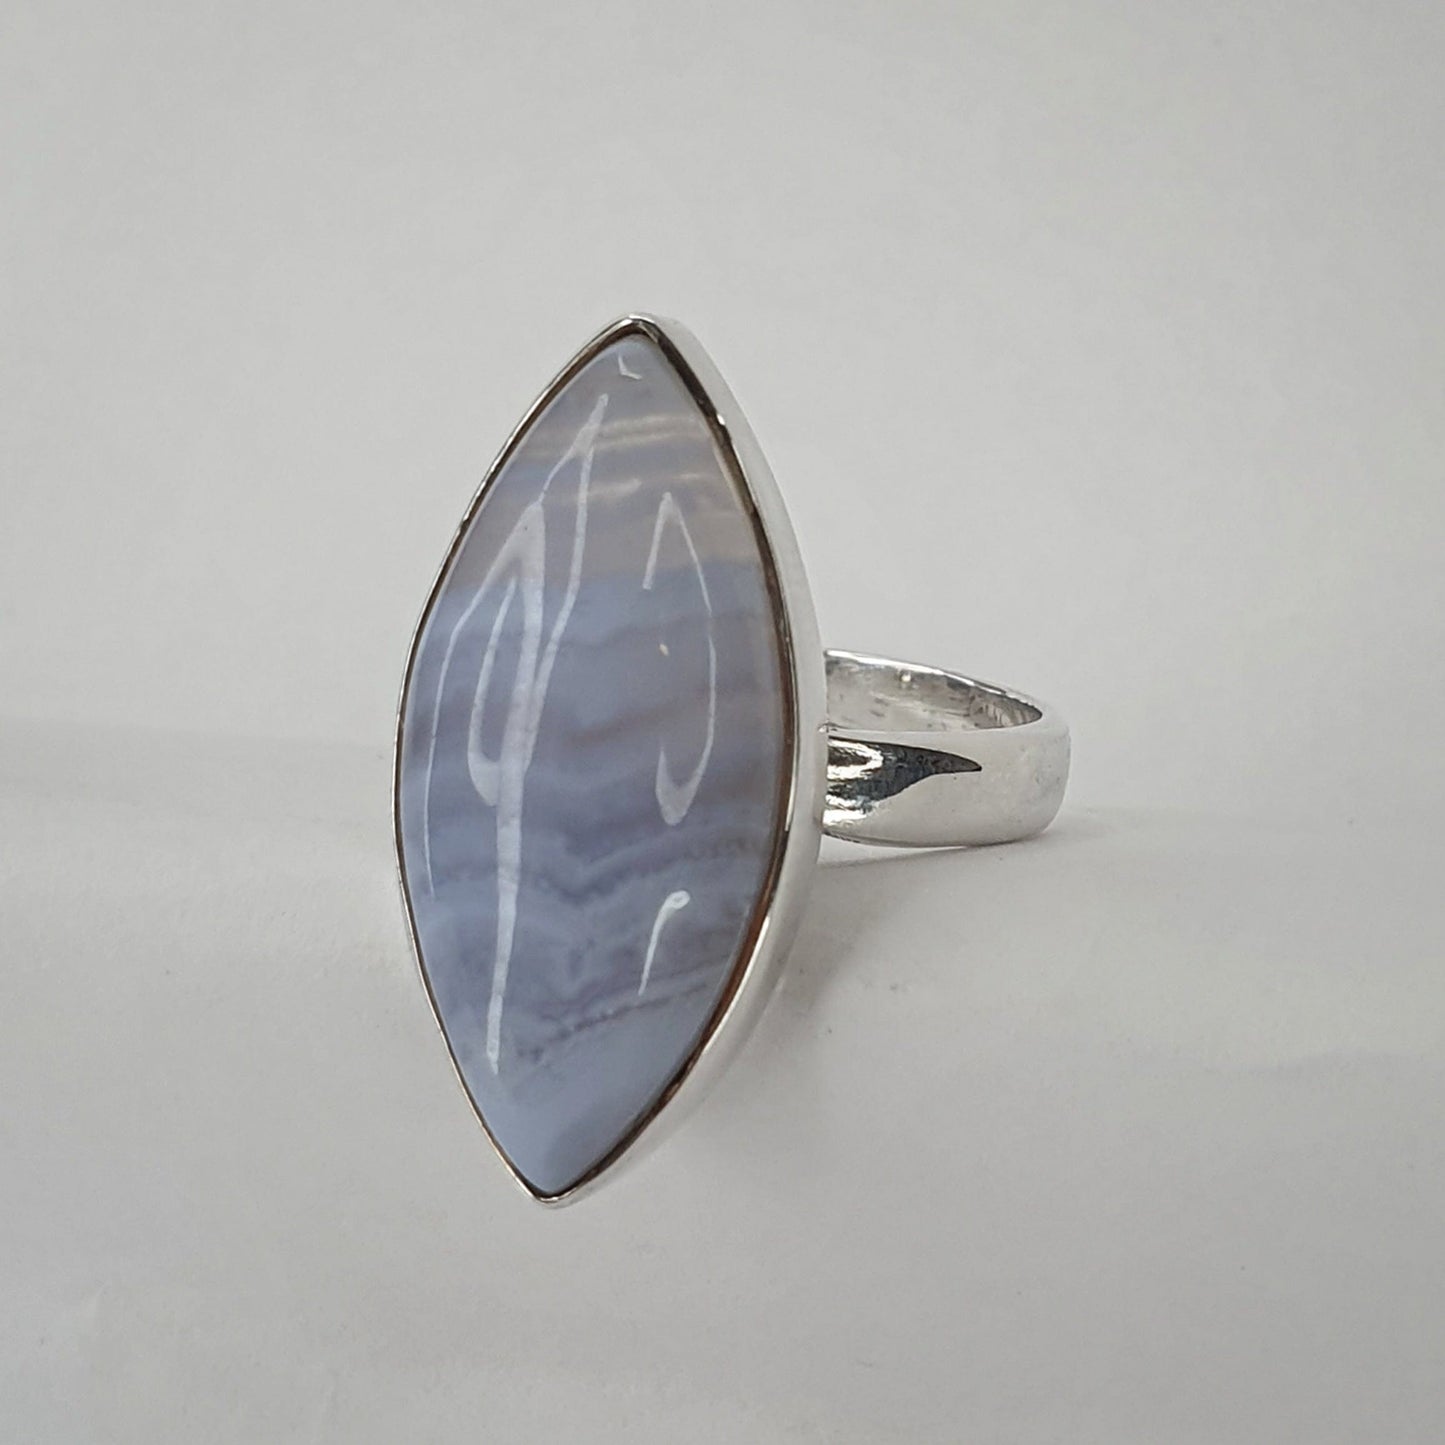 Blue Lace Agate Ring - Size 9 / S - ON SALE